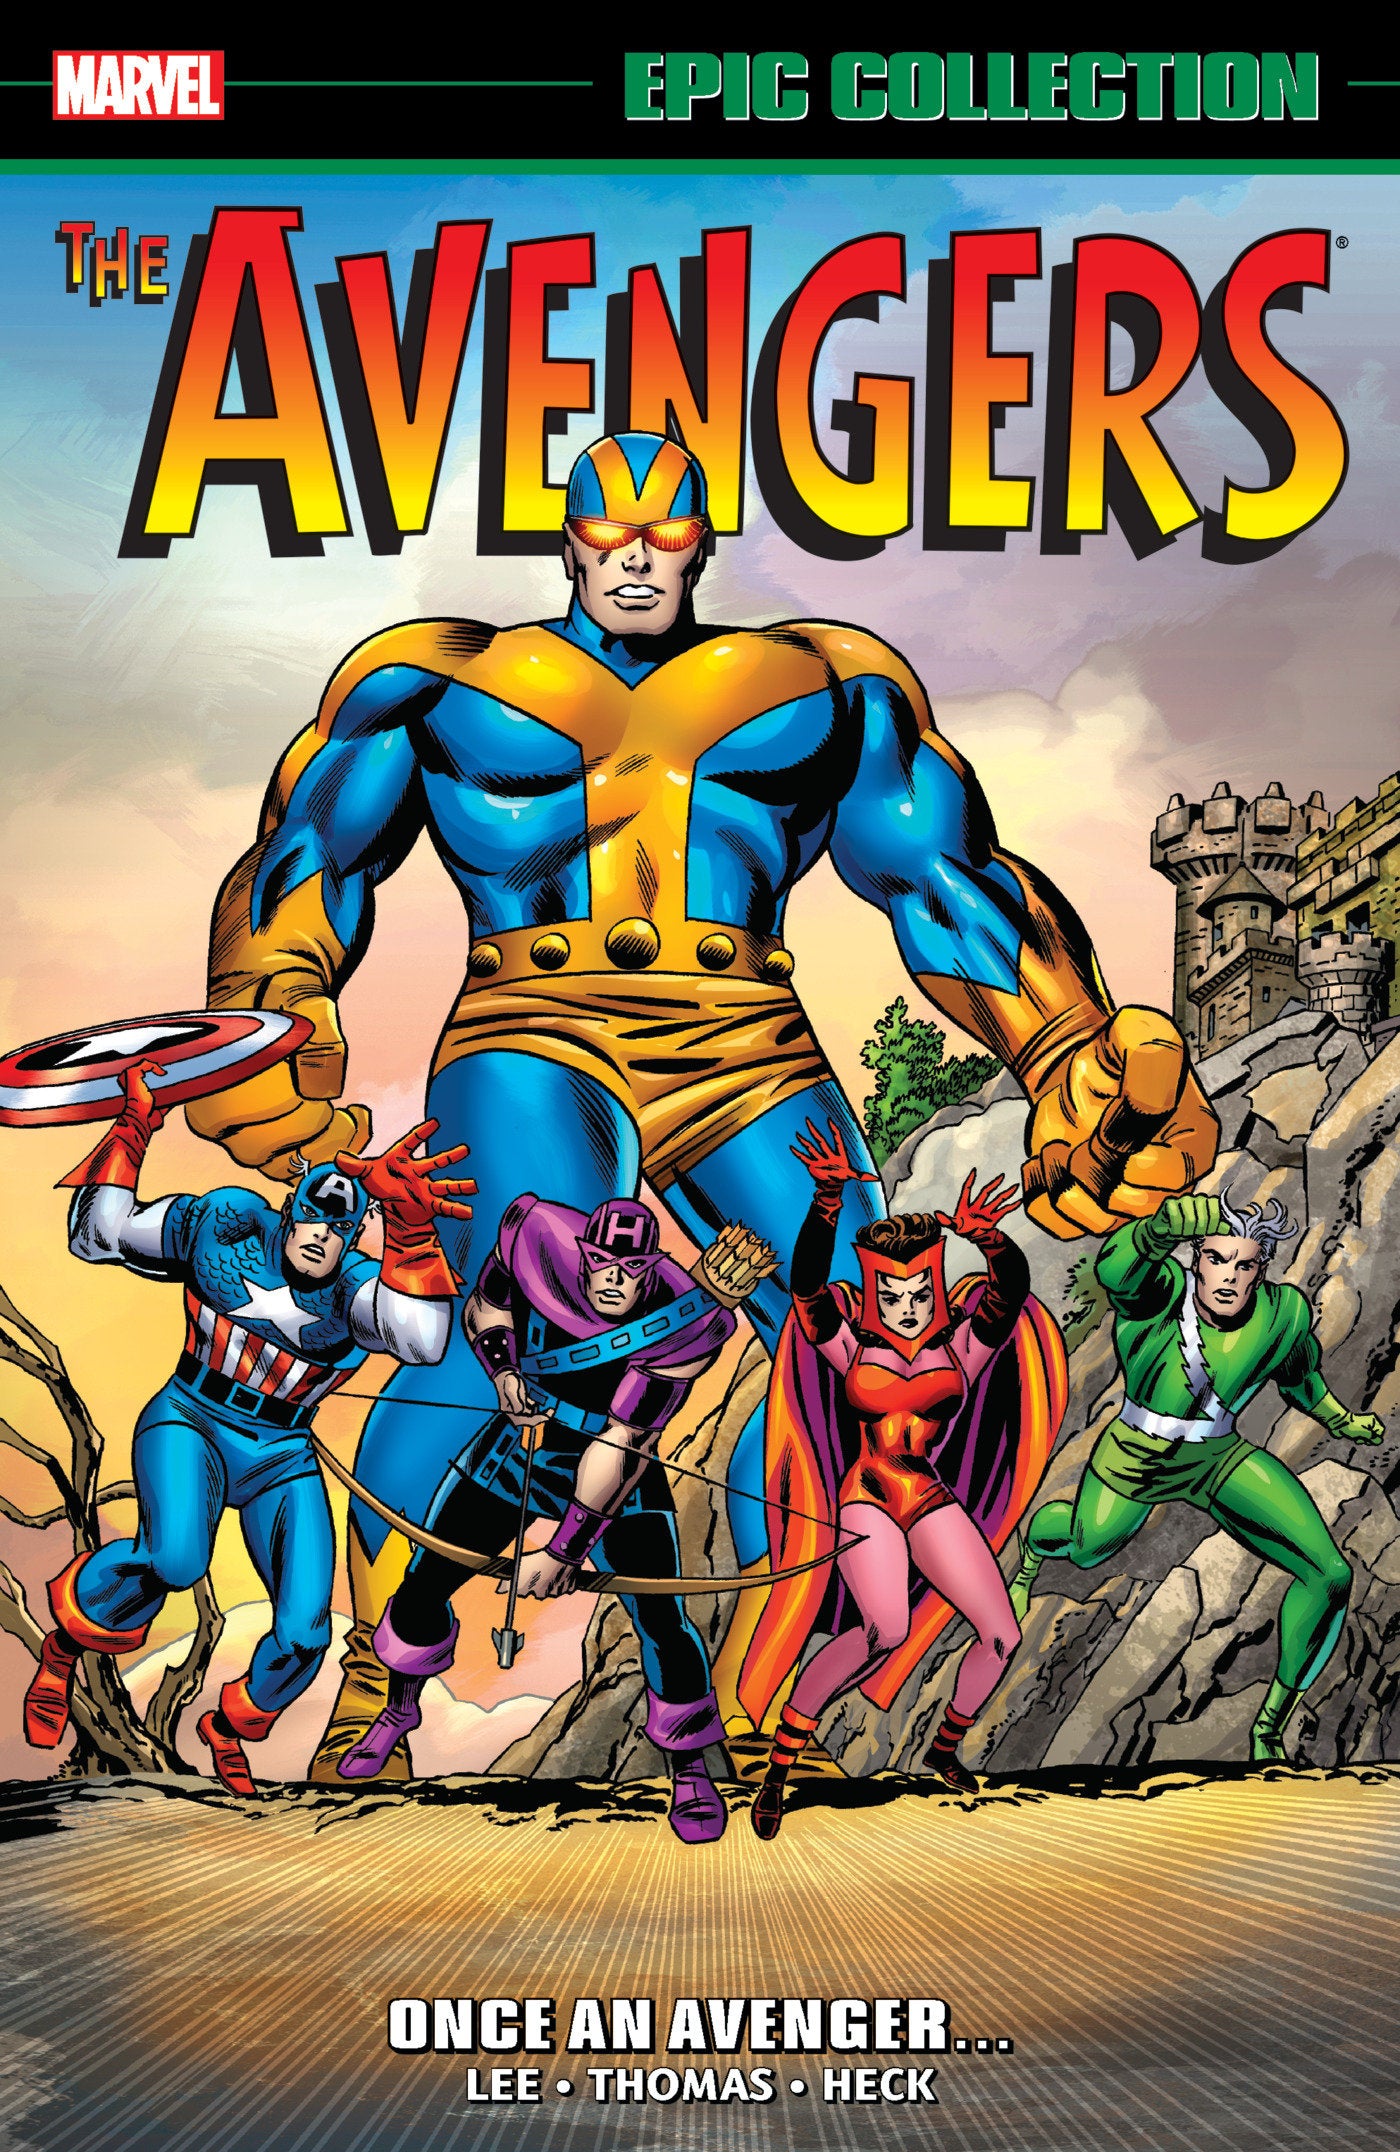 AVENGERS EPIC COLLECTION: ONCE AN AVENGER TRADE PAPERBACK